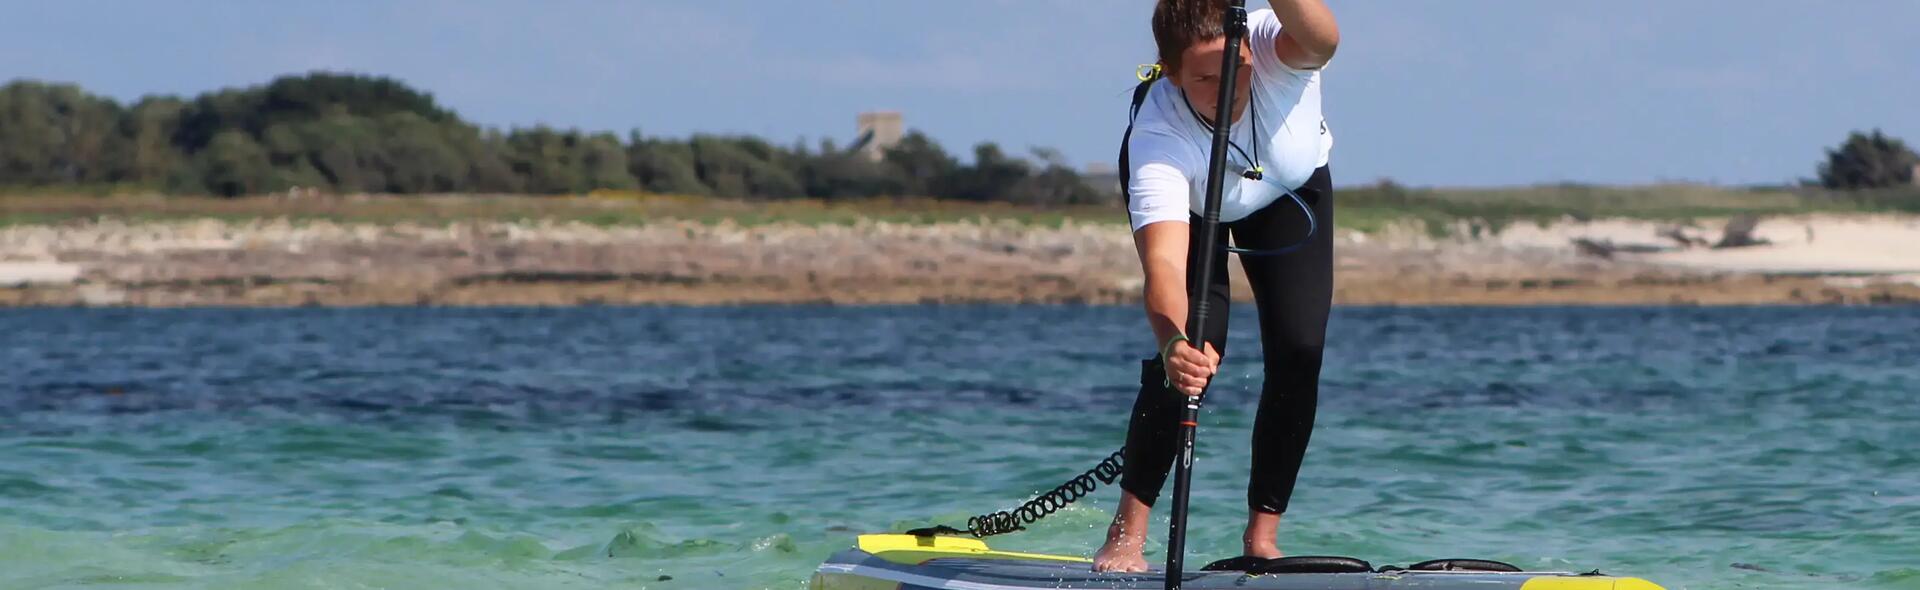 stand up paddle technique pagaie